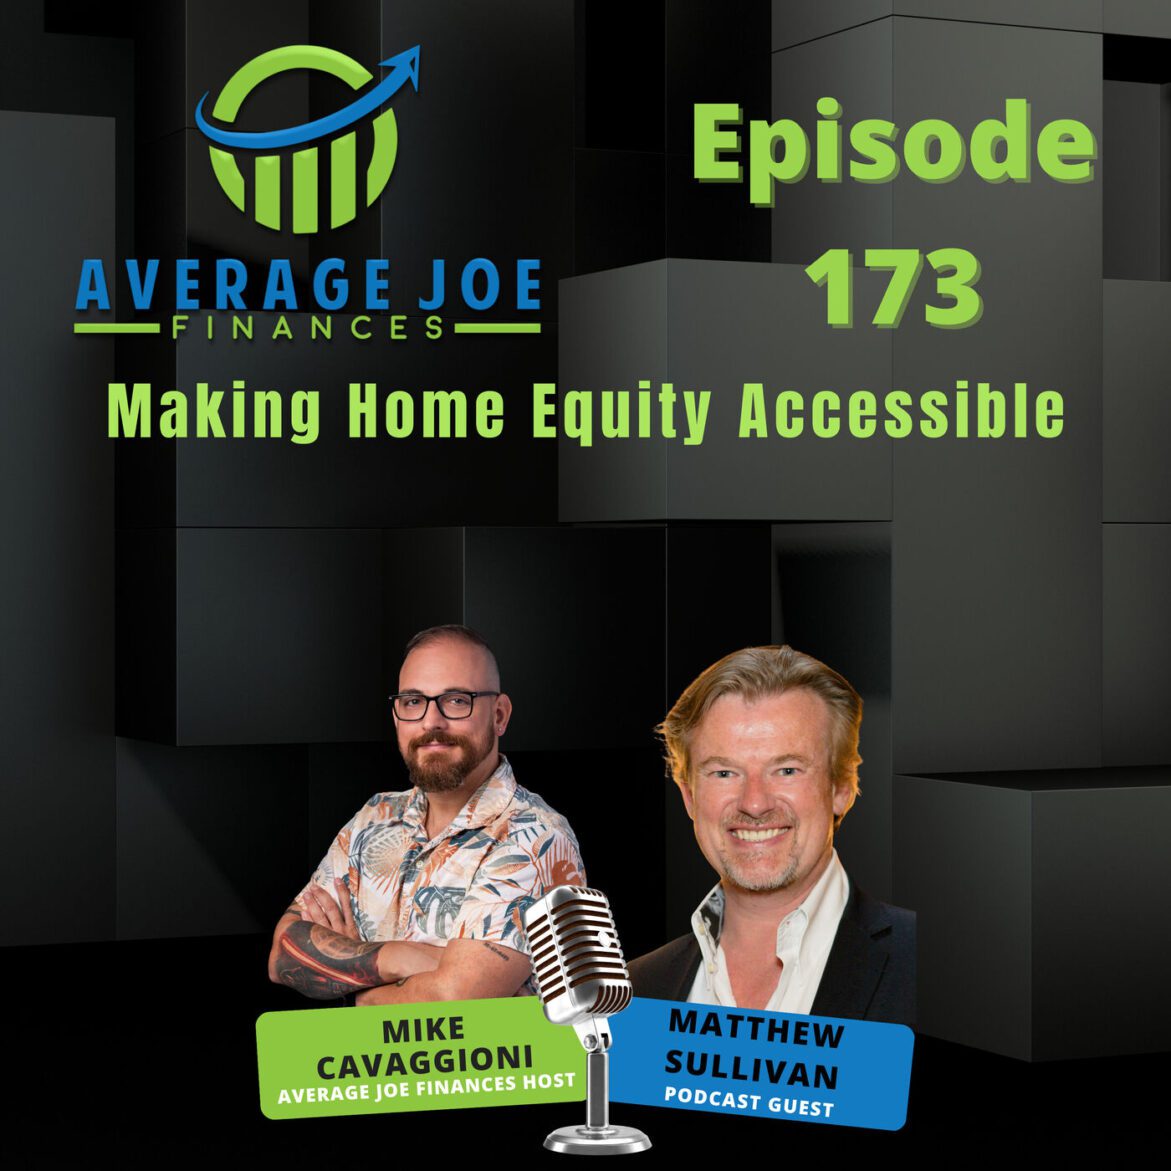 Black Podcasting - 173. Making Home Equity Accessible with Matthew Sullivan